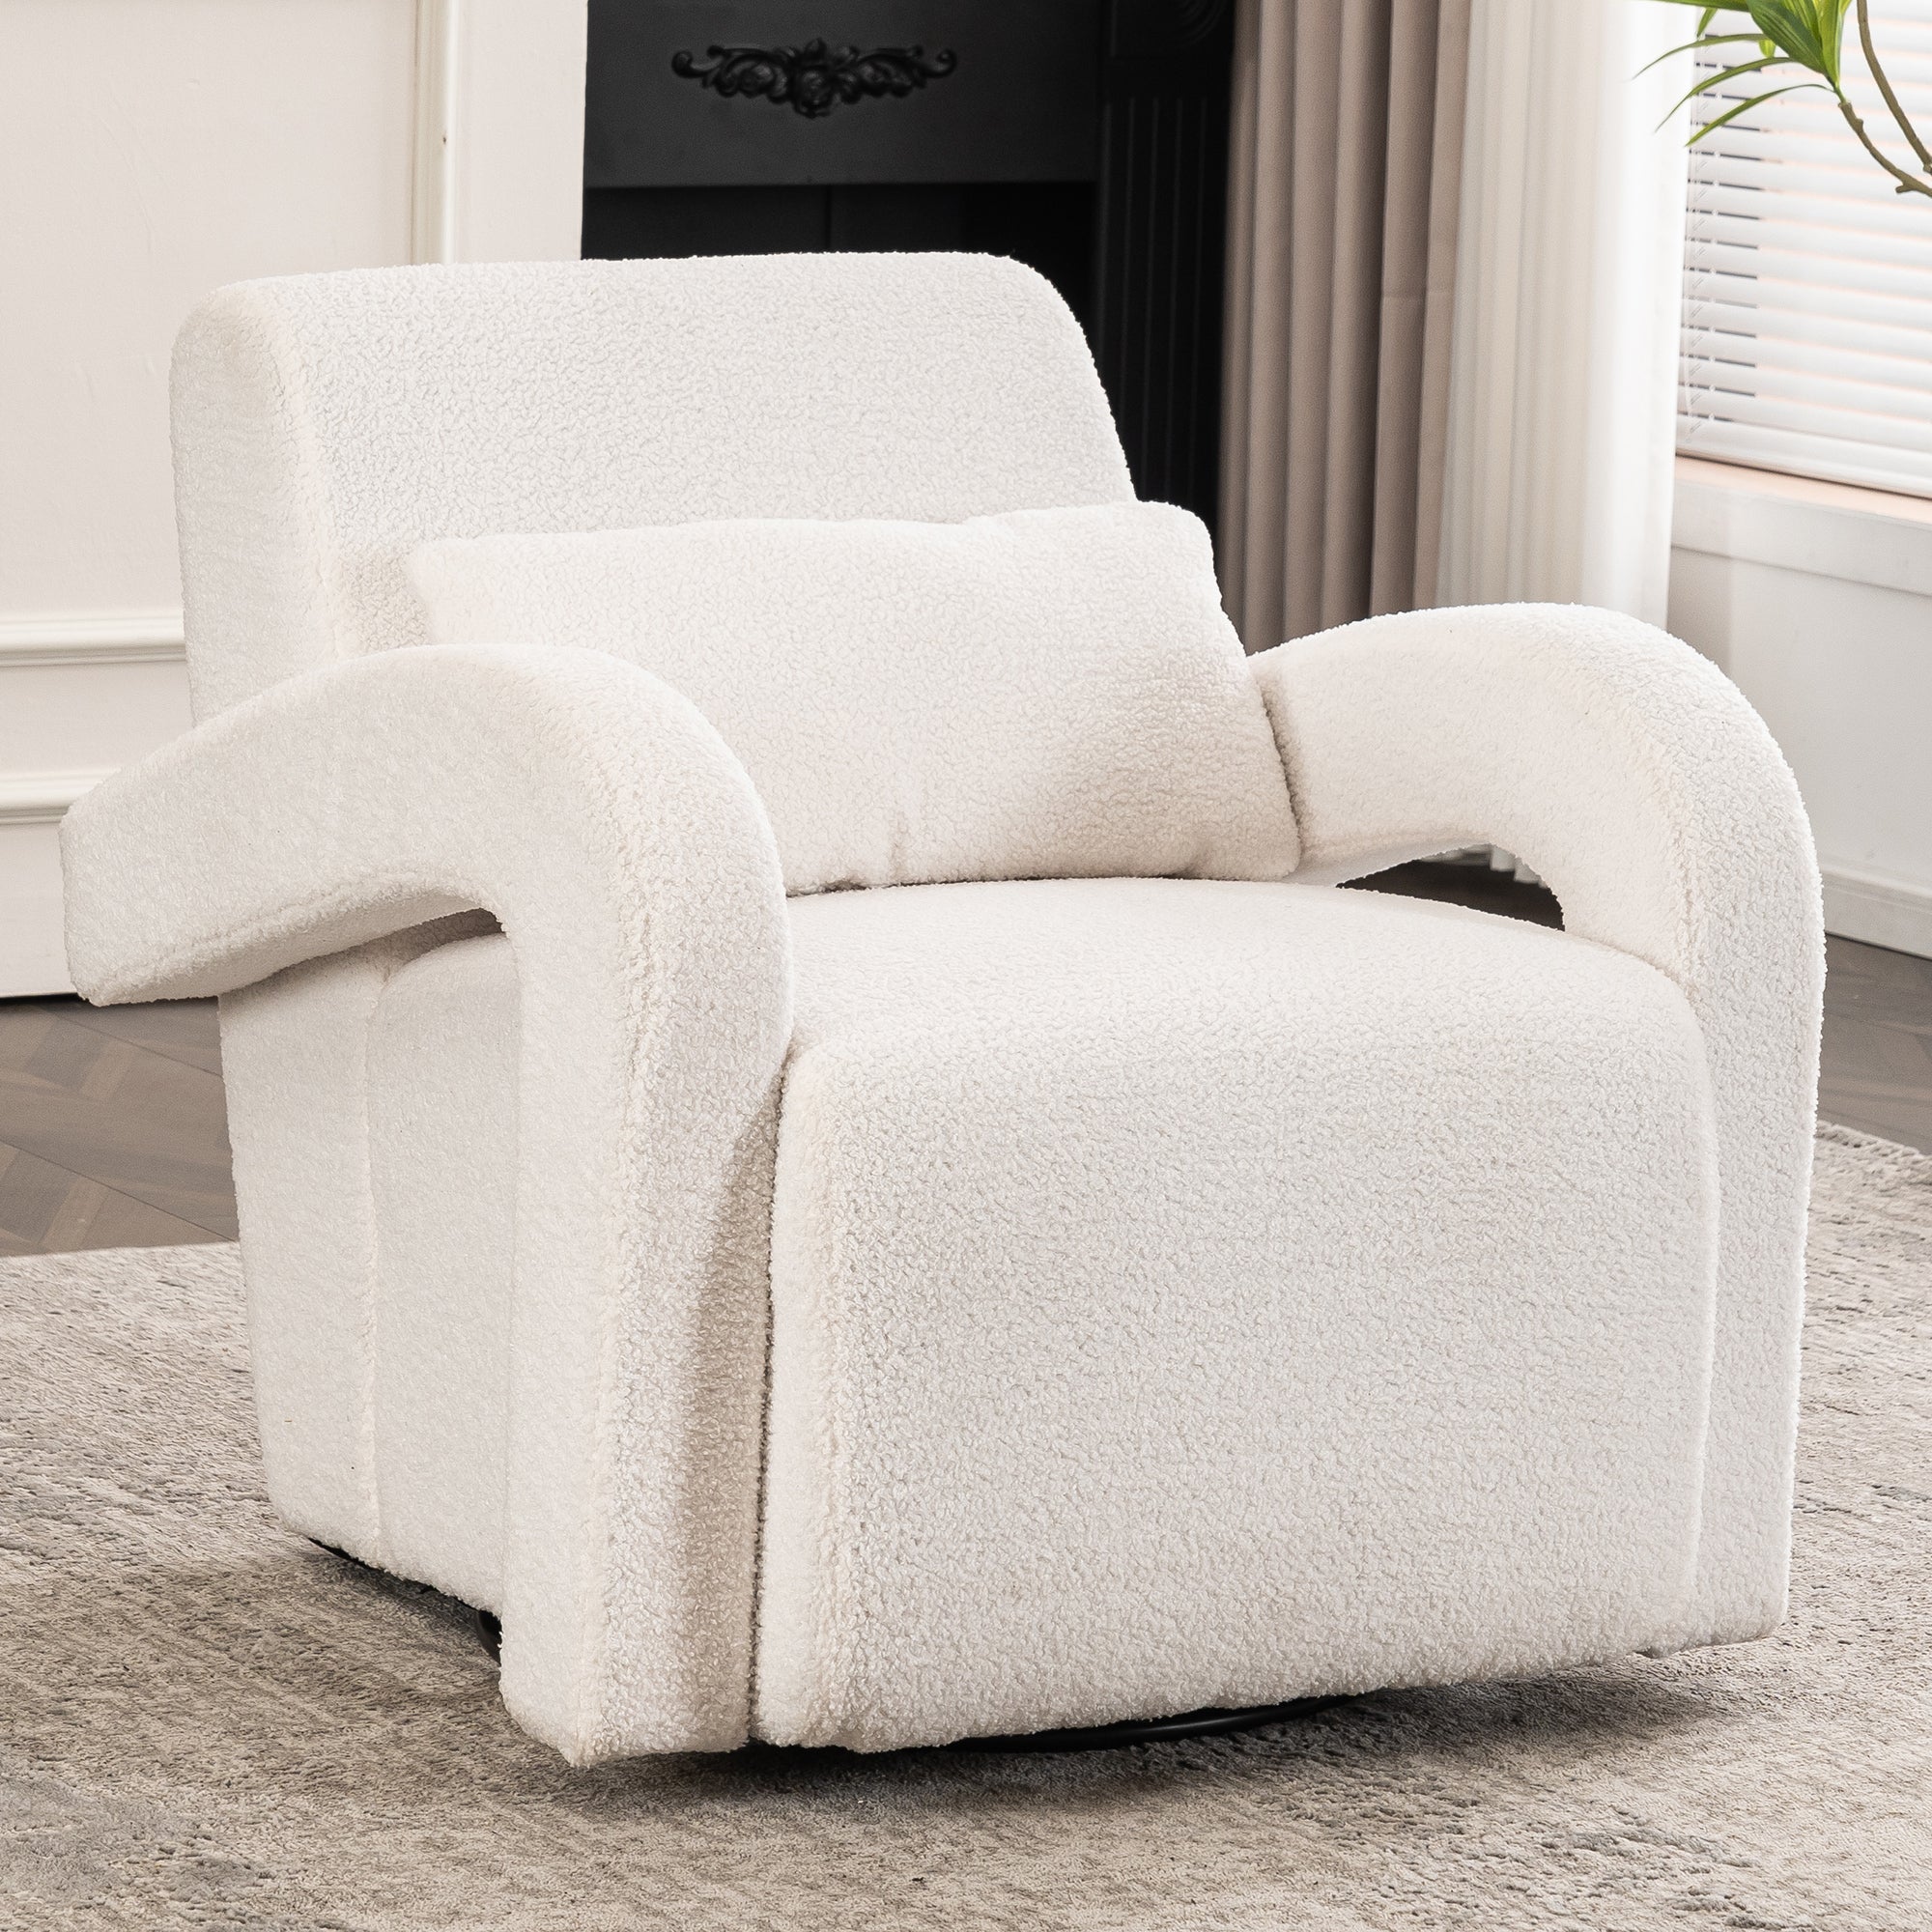 🆓🚛 Cozy Teddy Fabric Armchair - Modern Sturdy Lounge Chair With Curved Arms and Thick Cushioning for Plush Comfort, White